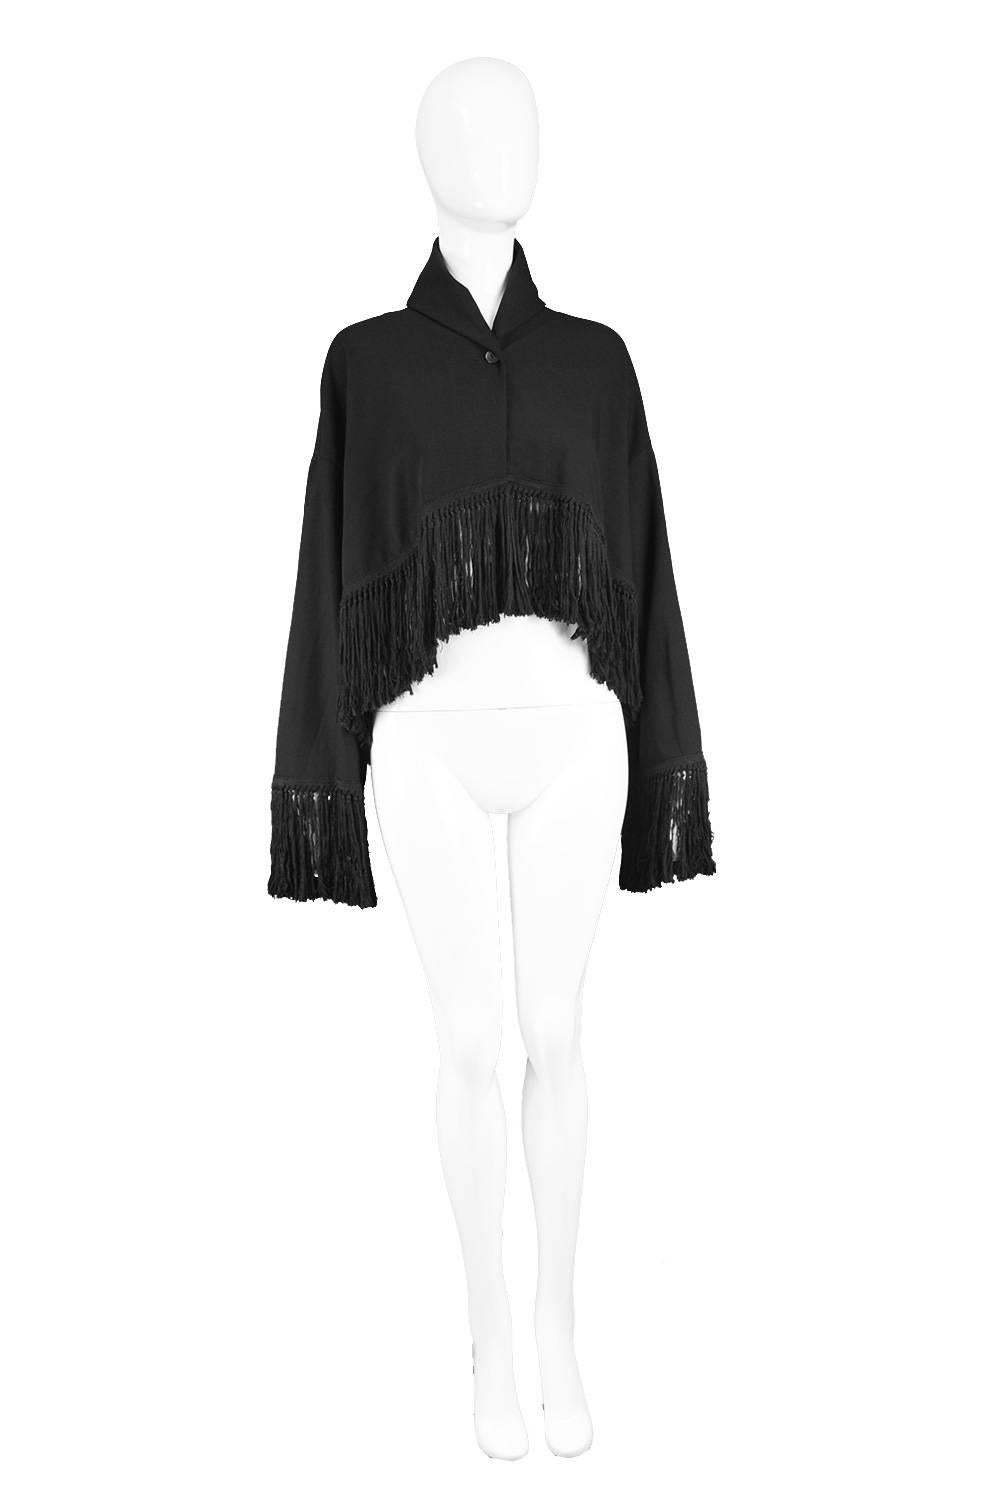 Romeo Gigli for Callaghan Knotted Fringe Black Stretch Wool Jacket, 1990s 

Size: Marked EU 40 which is roughly a UK 12/ US 8 but would fit a Small to Large due to oversized cape style fit. 
Bust - Free
Waist - Free
Length (Front) - 17” /